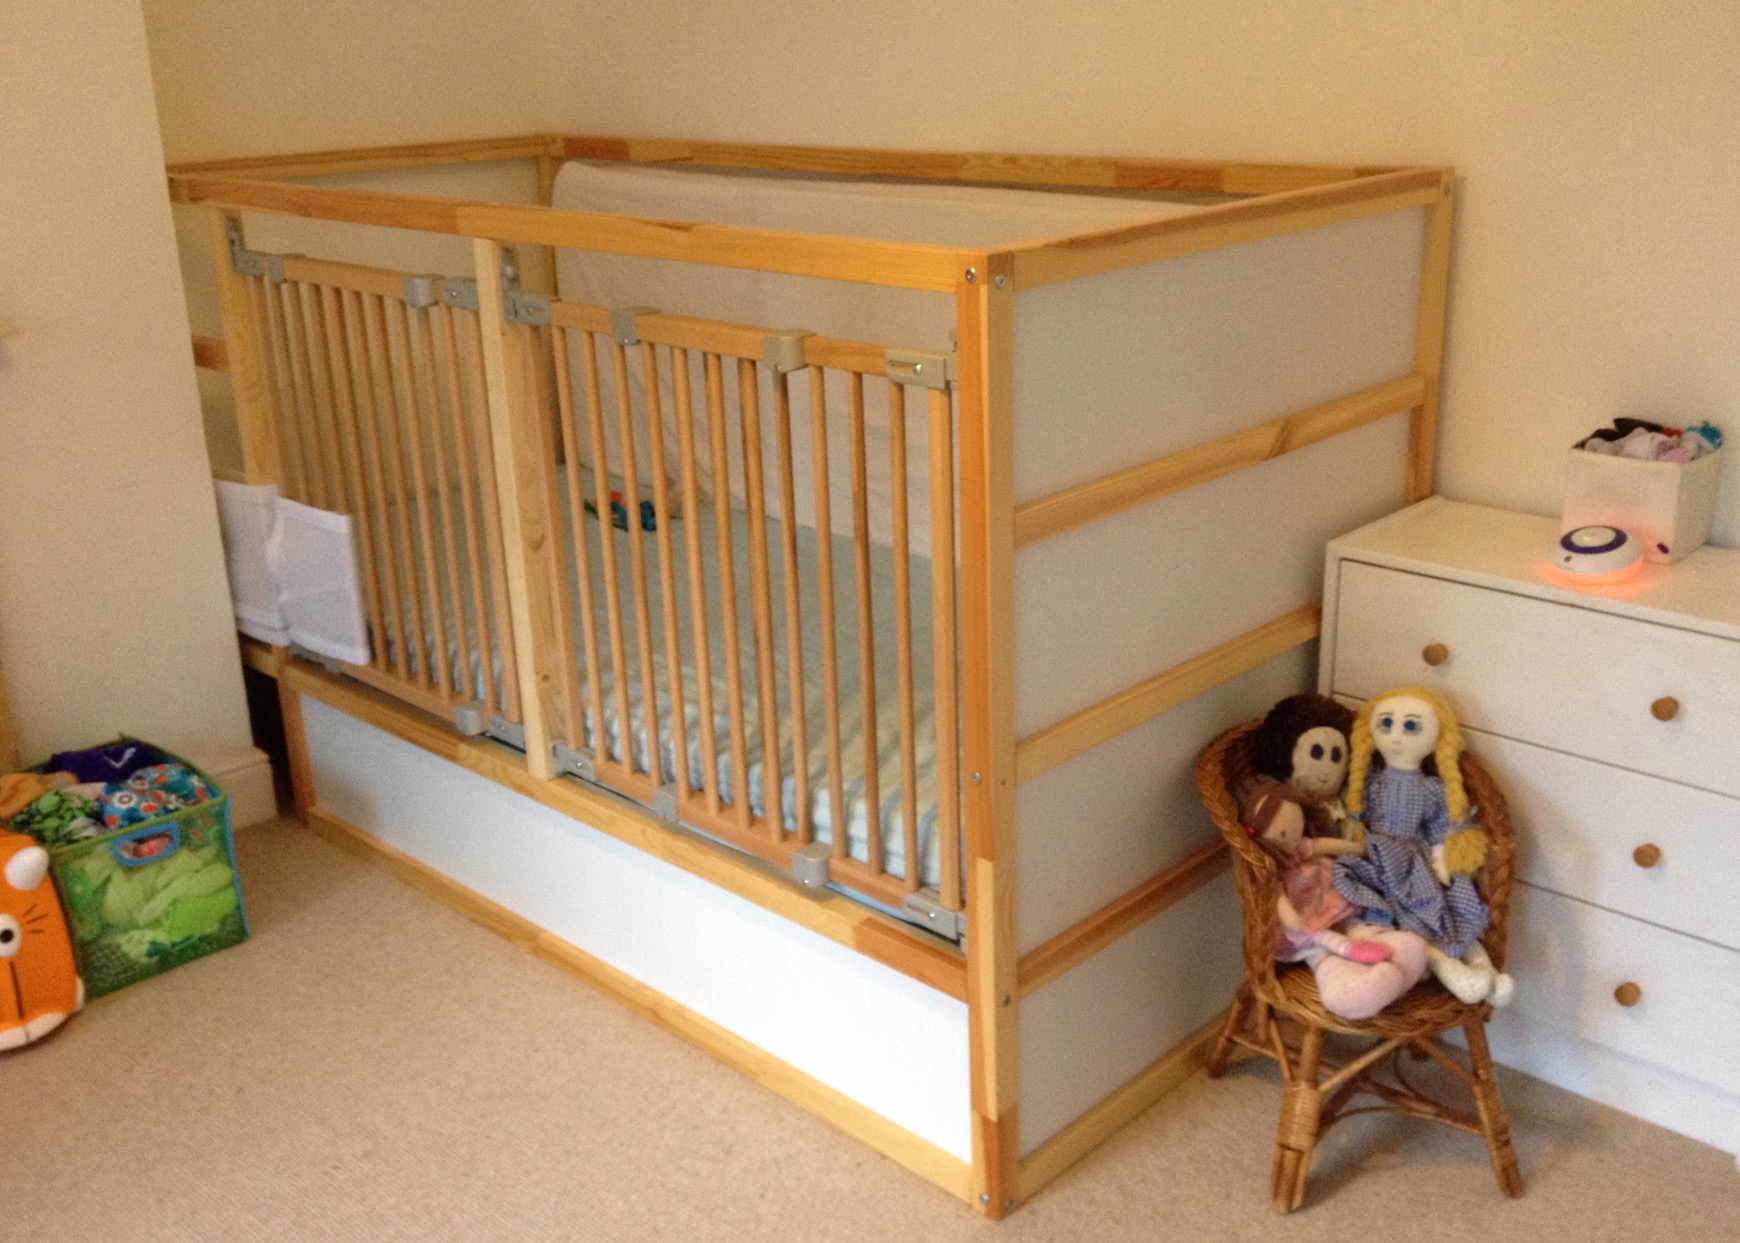 View of our original hack of an Ikea Kura bed with wooden stair gates infilling the open side